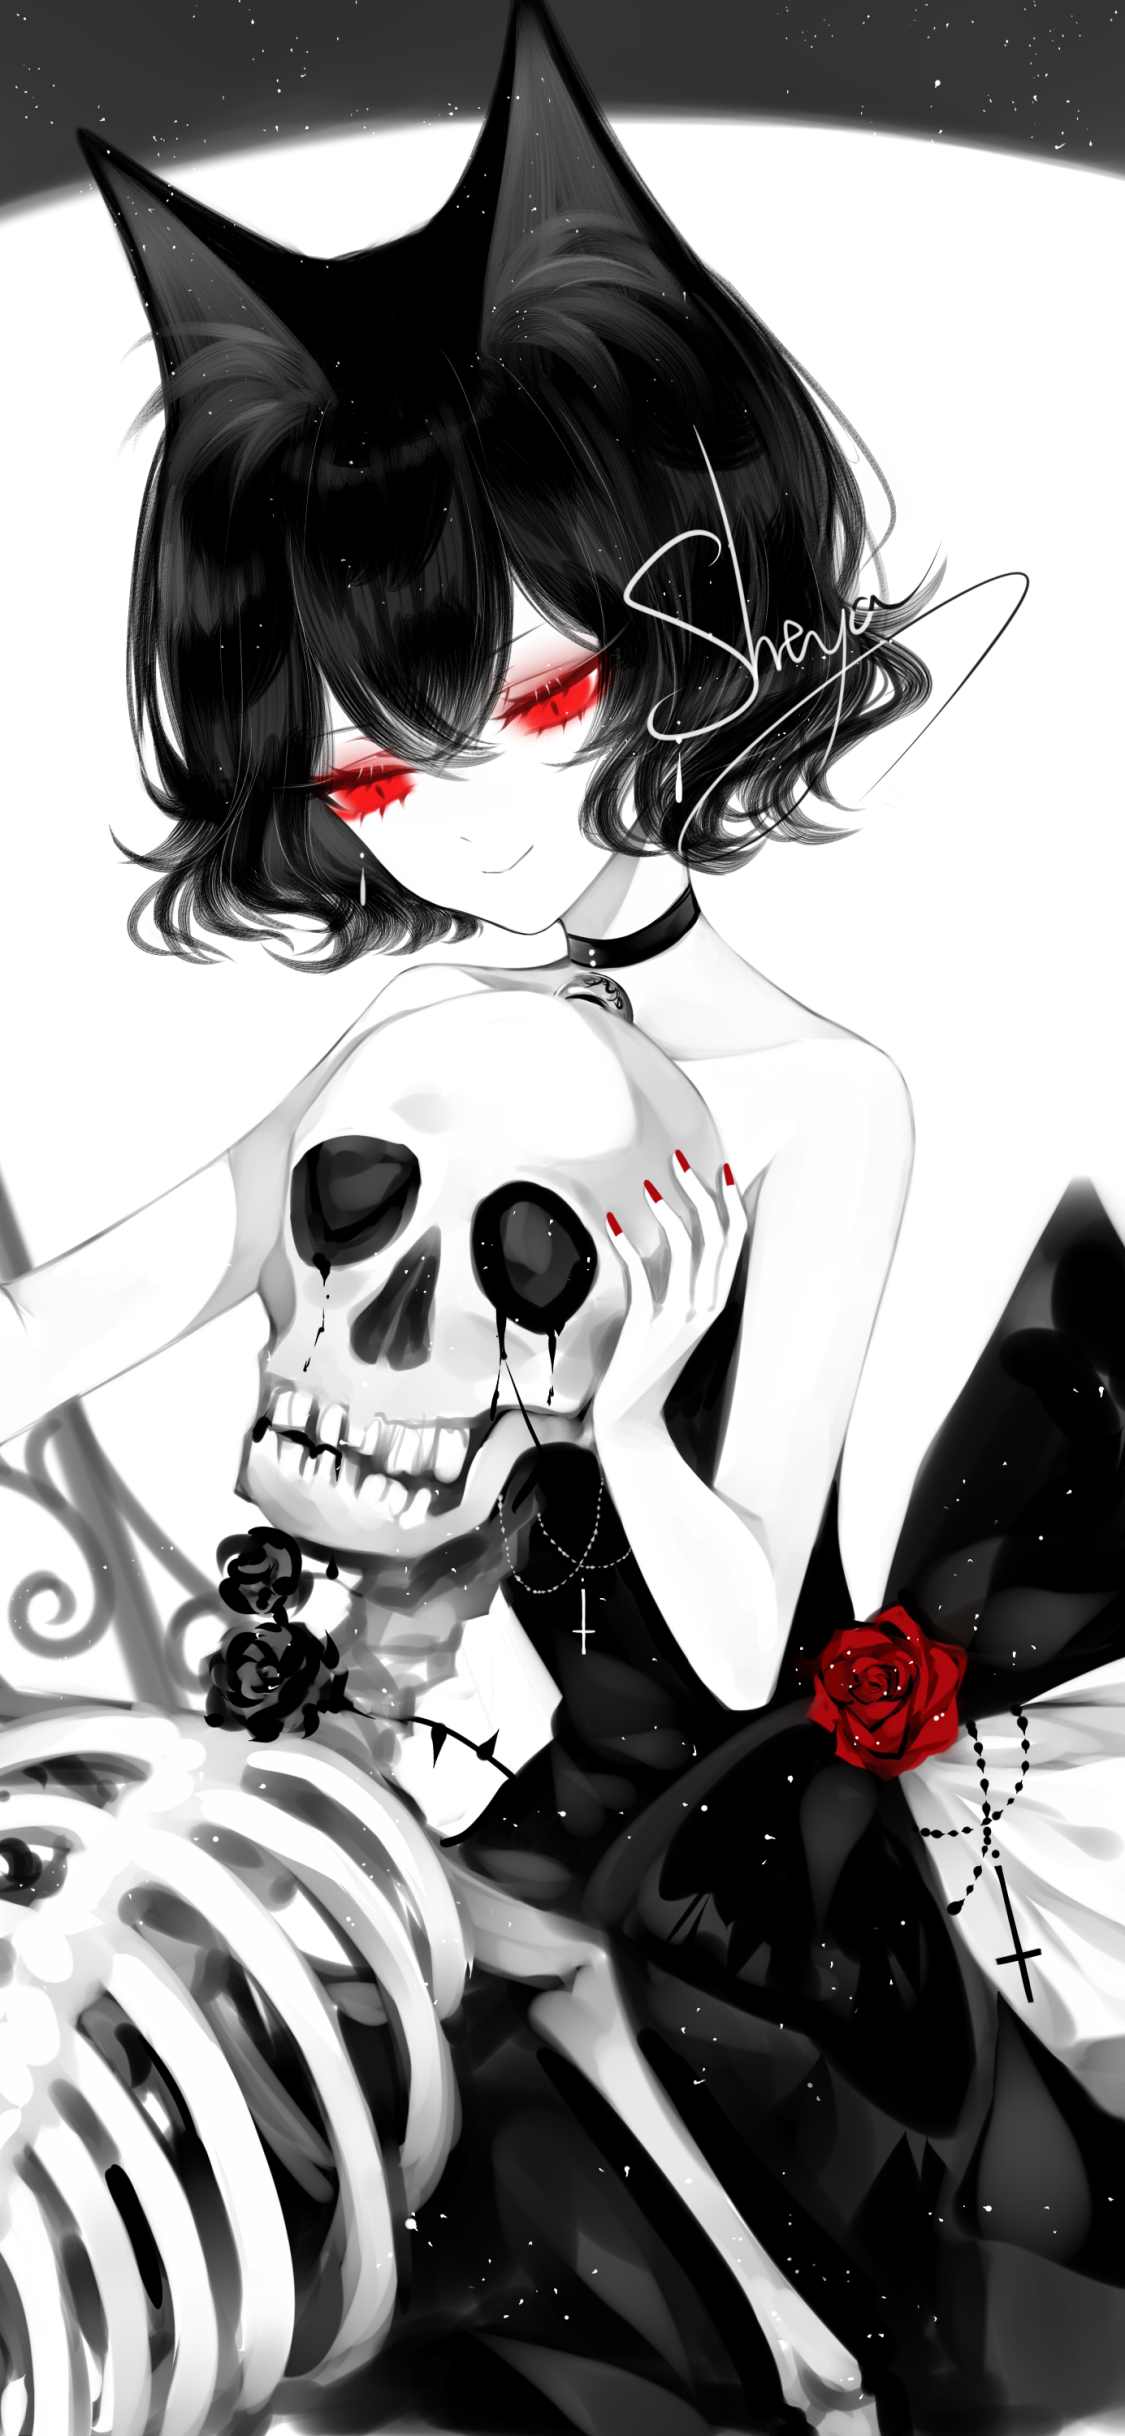 The Skeleton Girl by thecrow1299 on DeviantArt